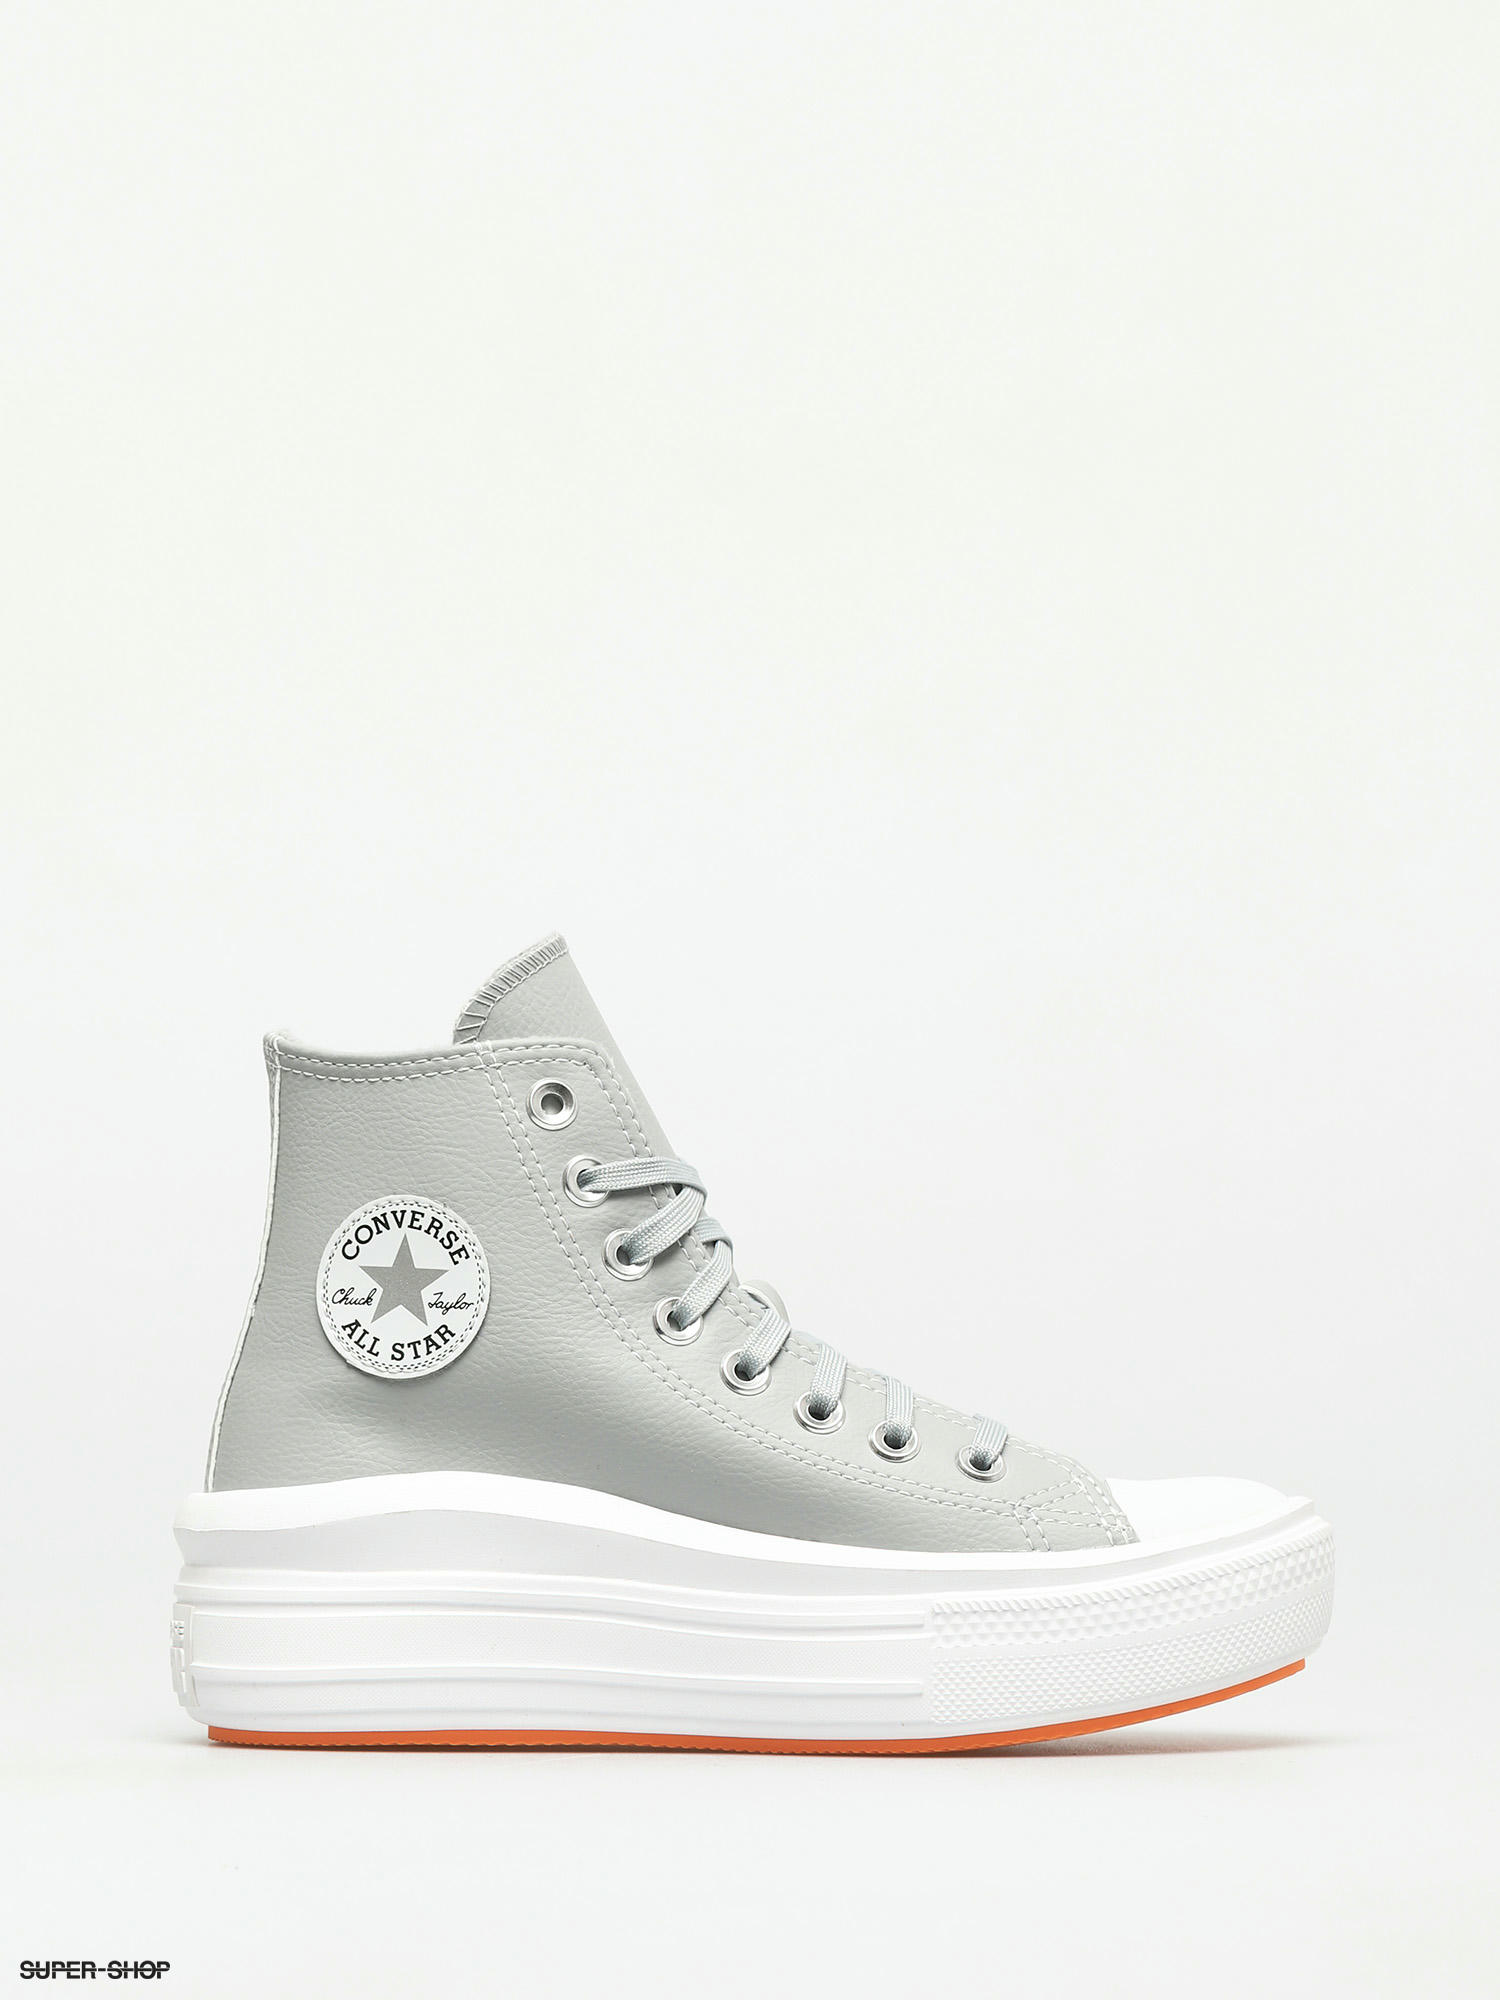 converse chuck taylor all star low top grey